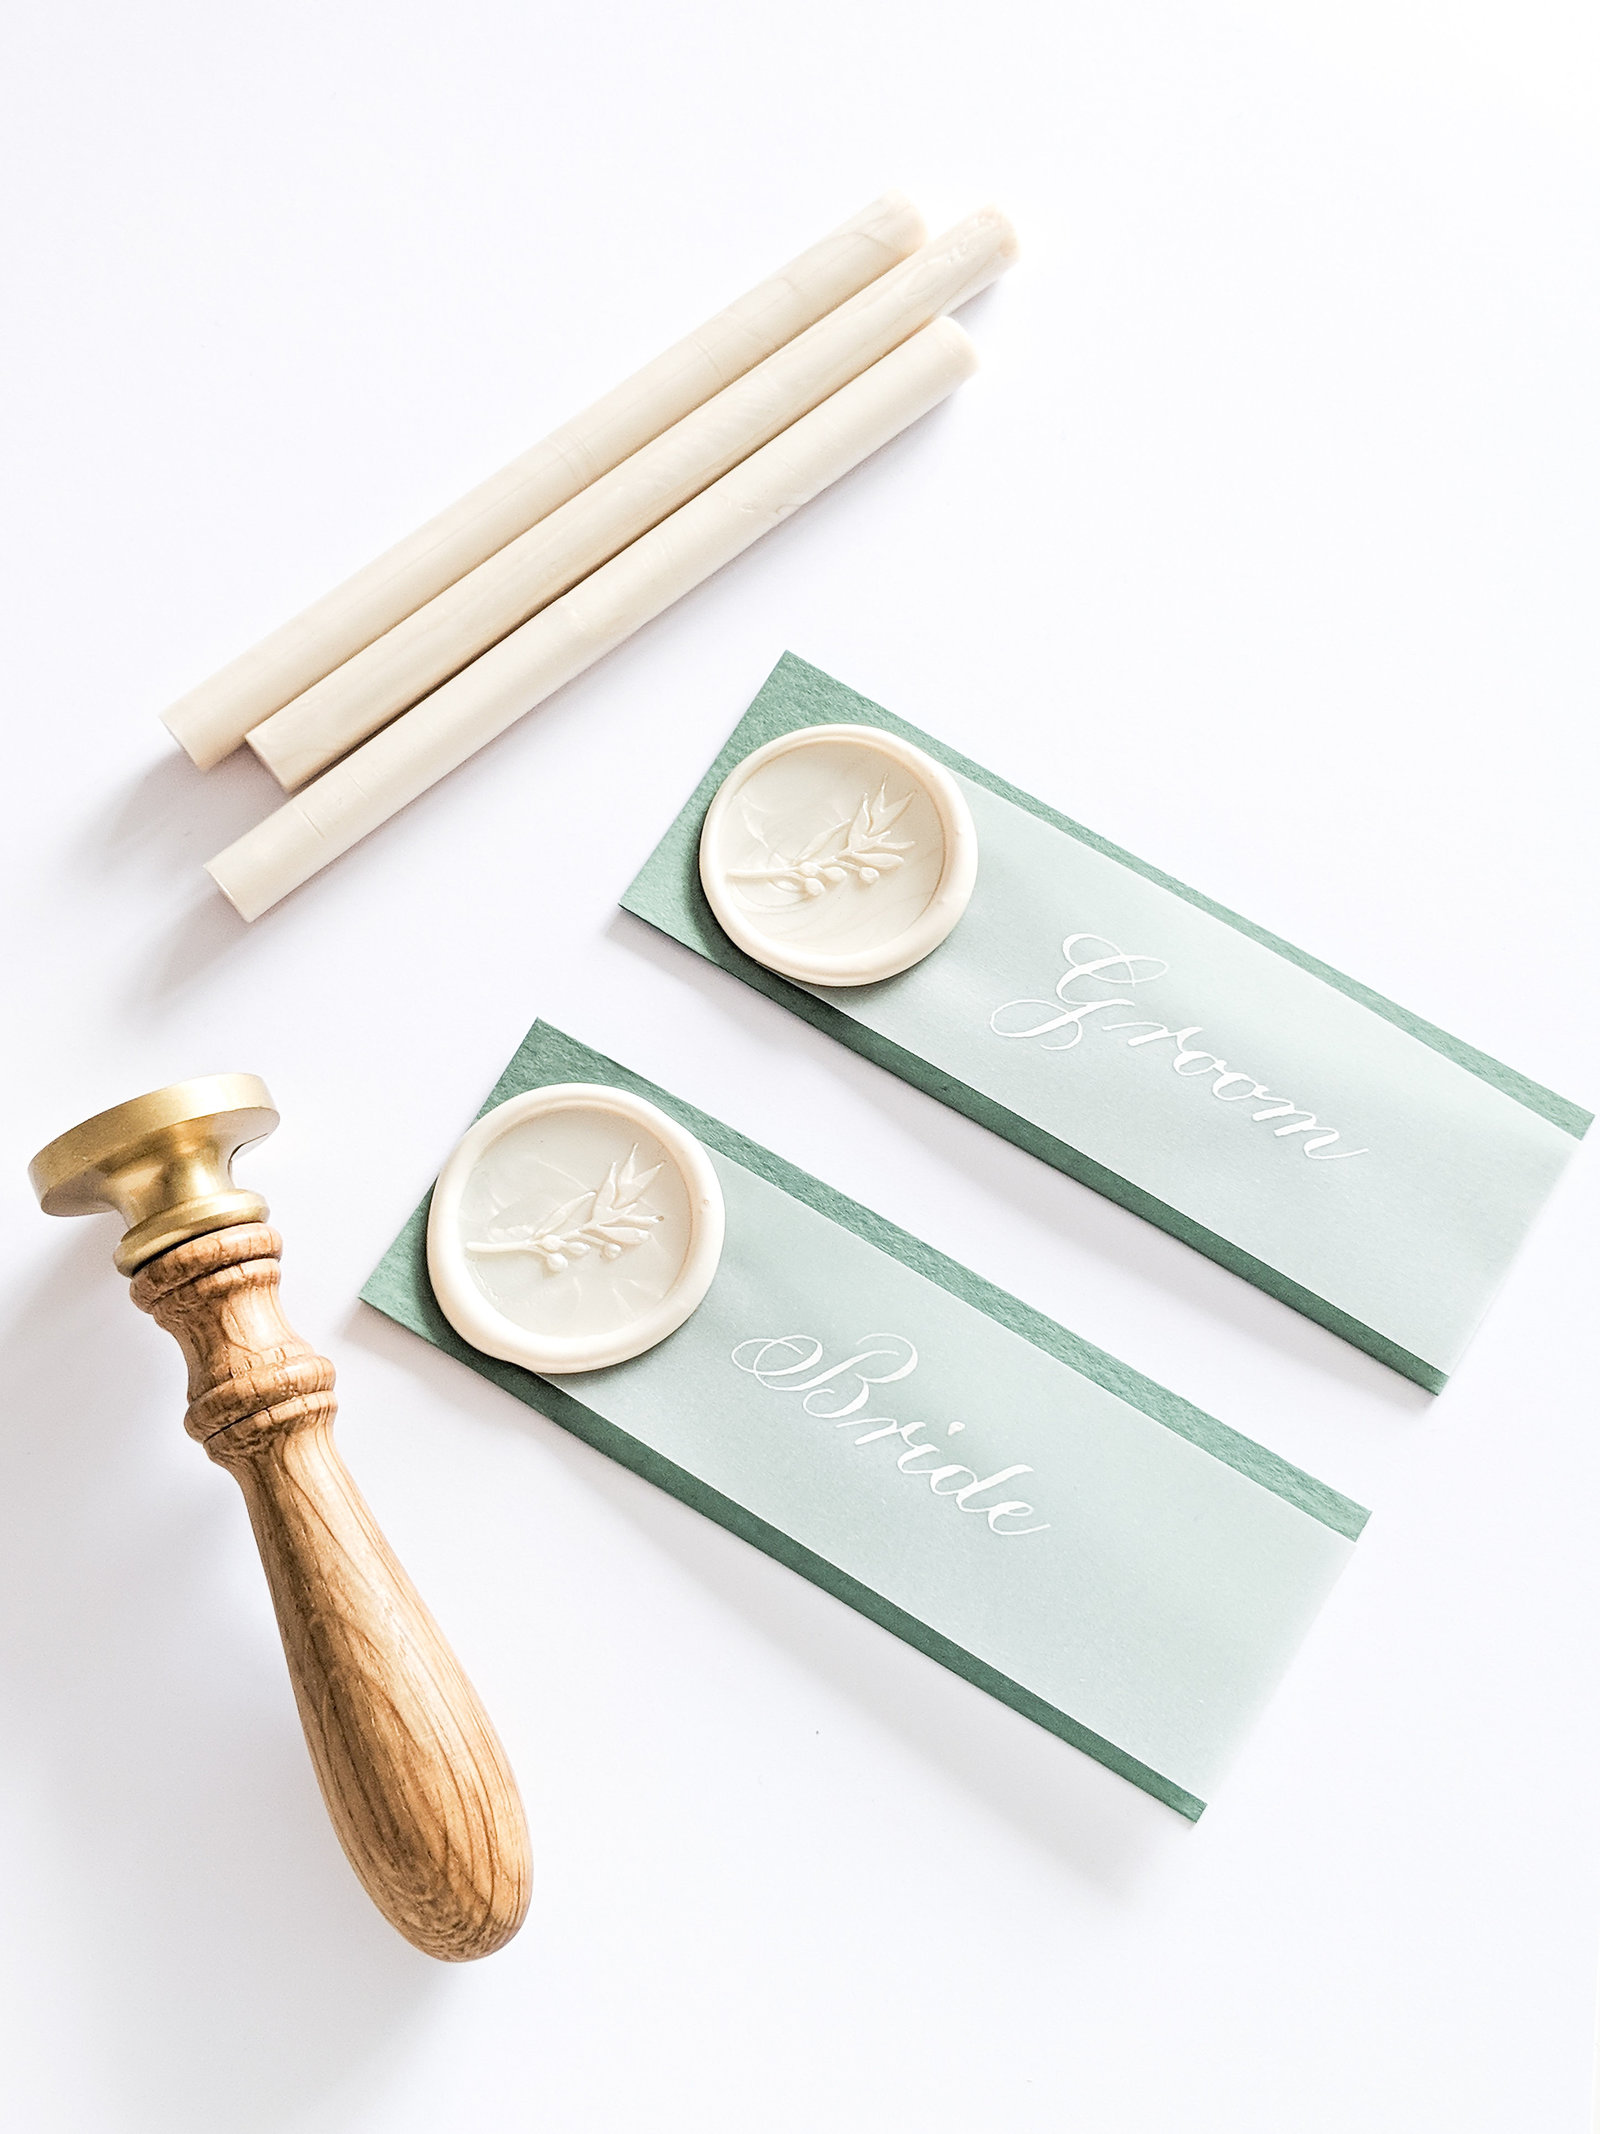 Green and white place cards with wax seal and calligraphy